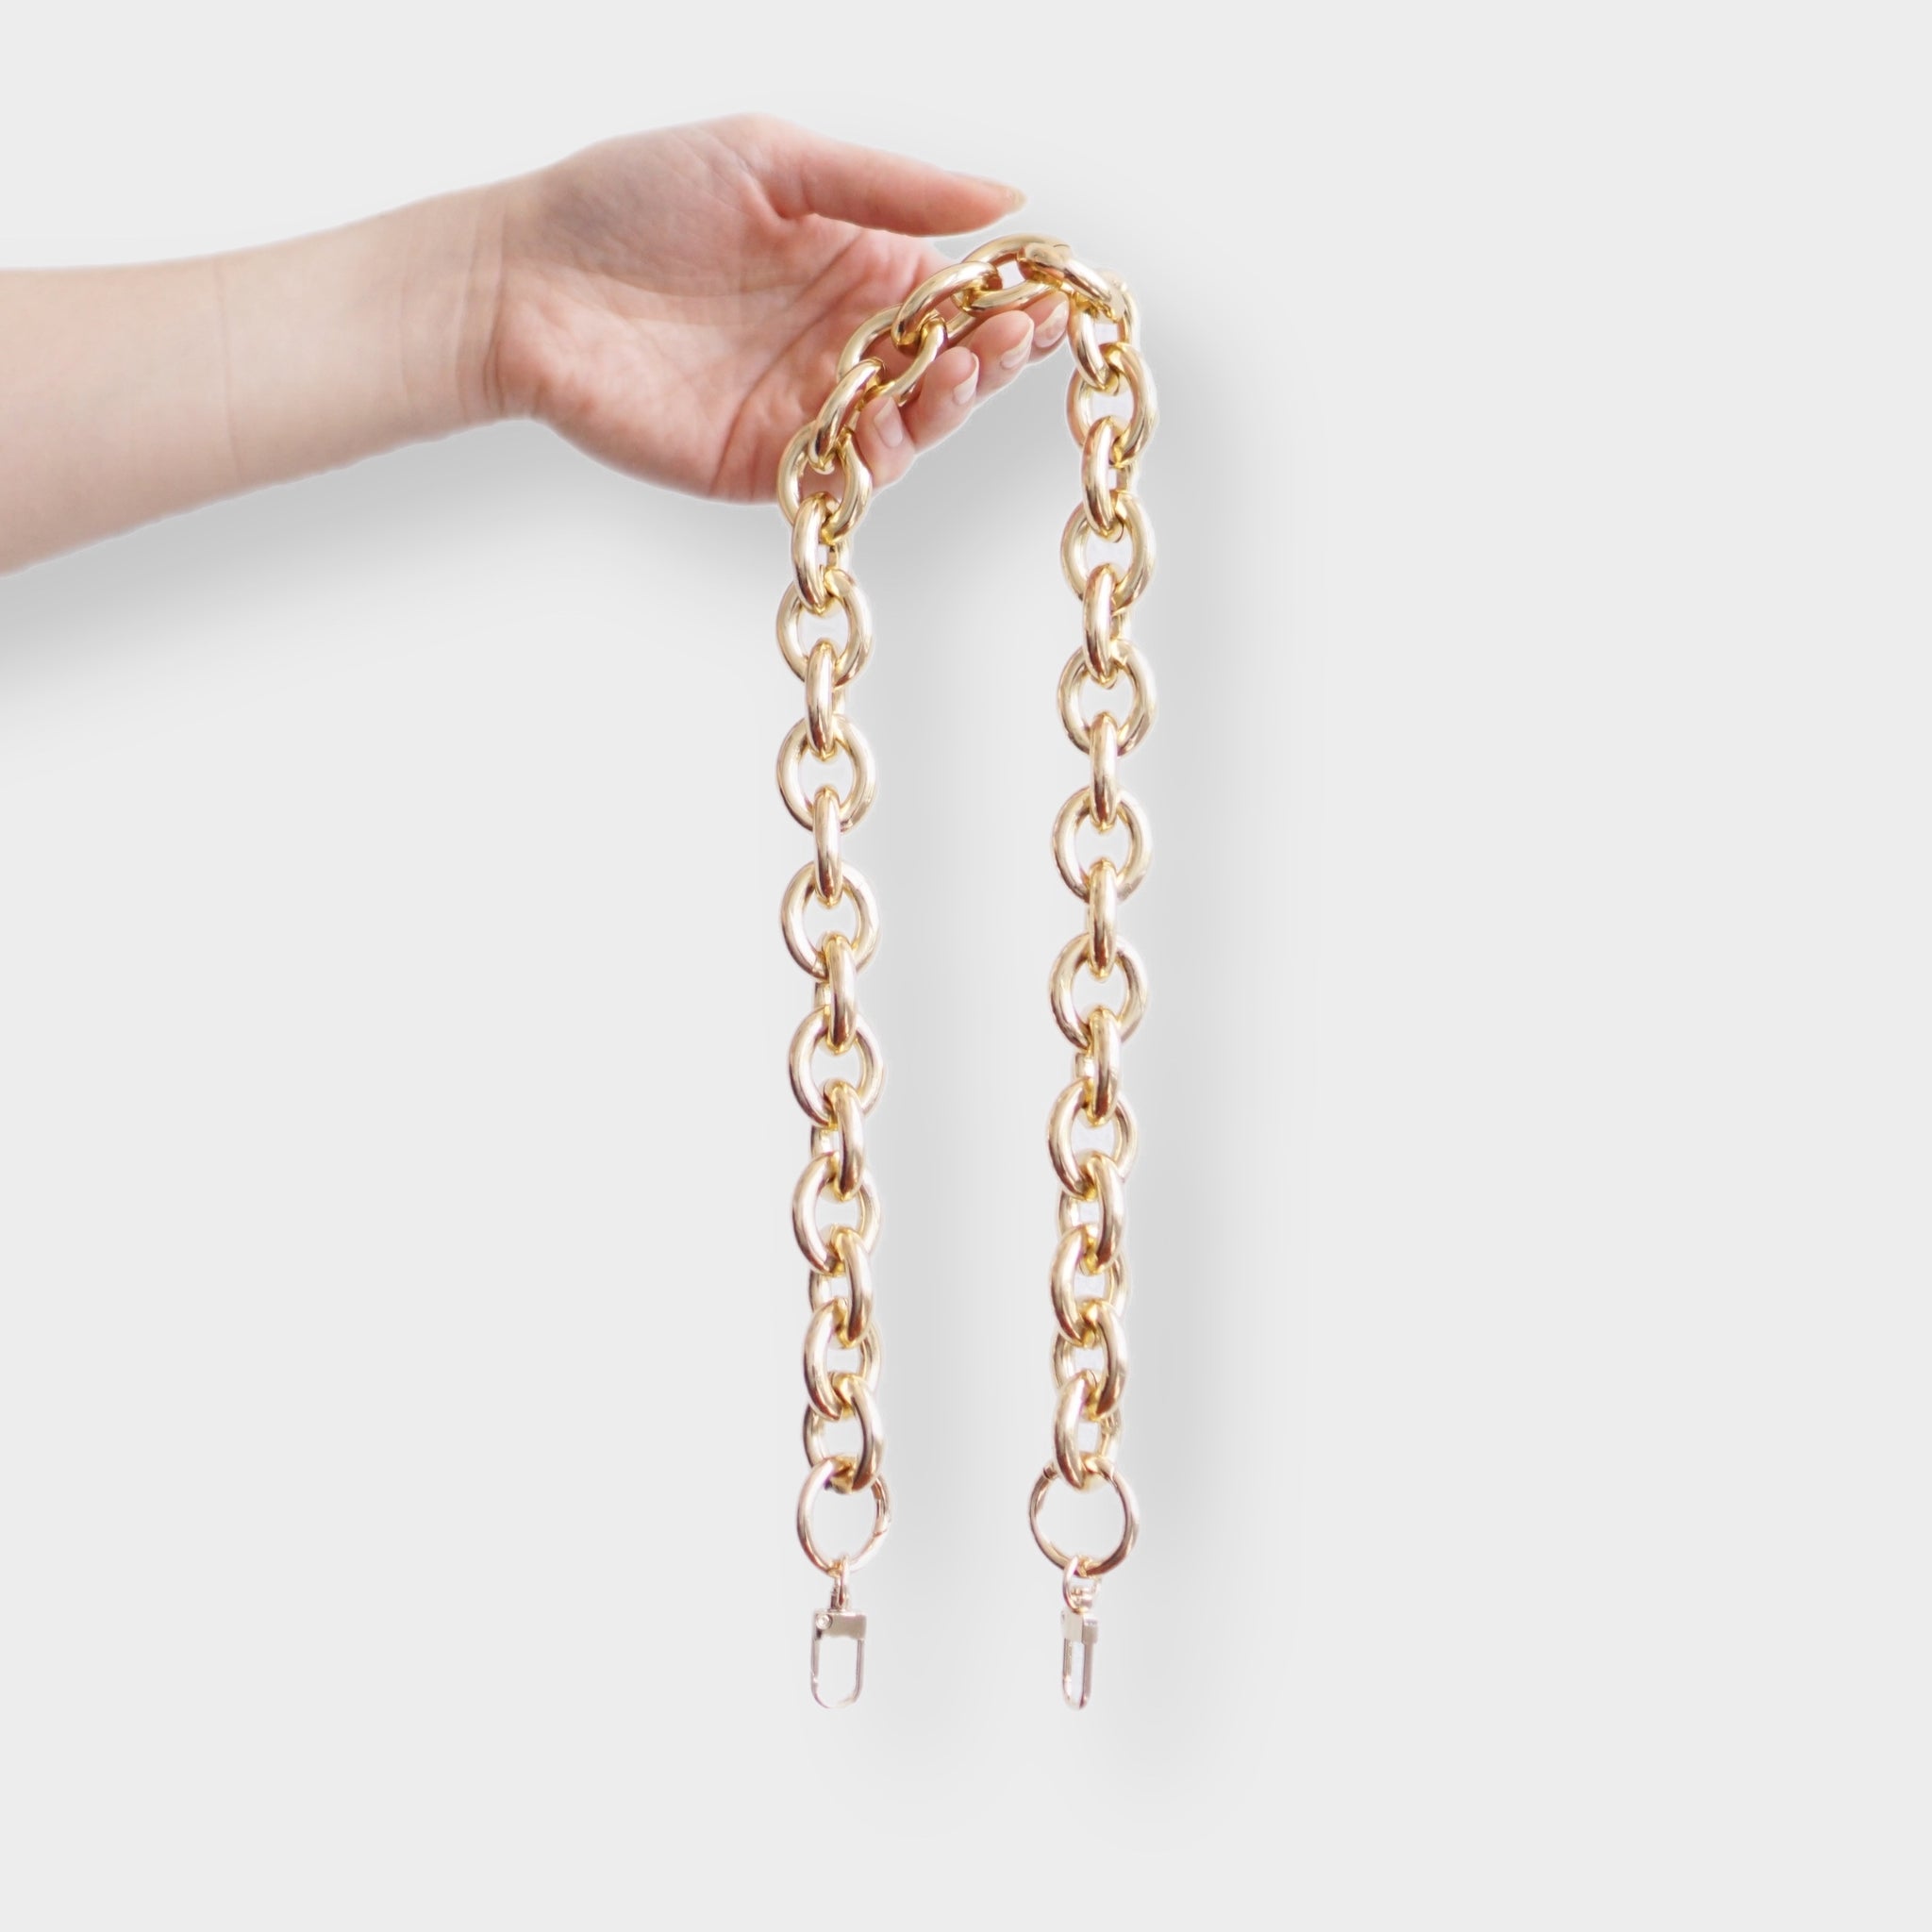 Chunky Flat Gold Chain Handle Decorative Strap for Toiletry 